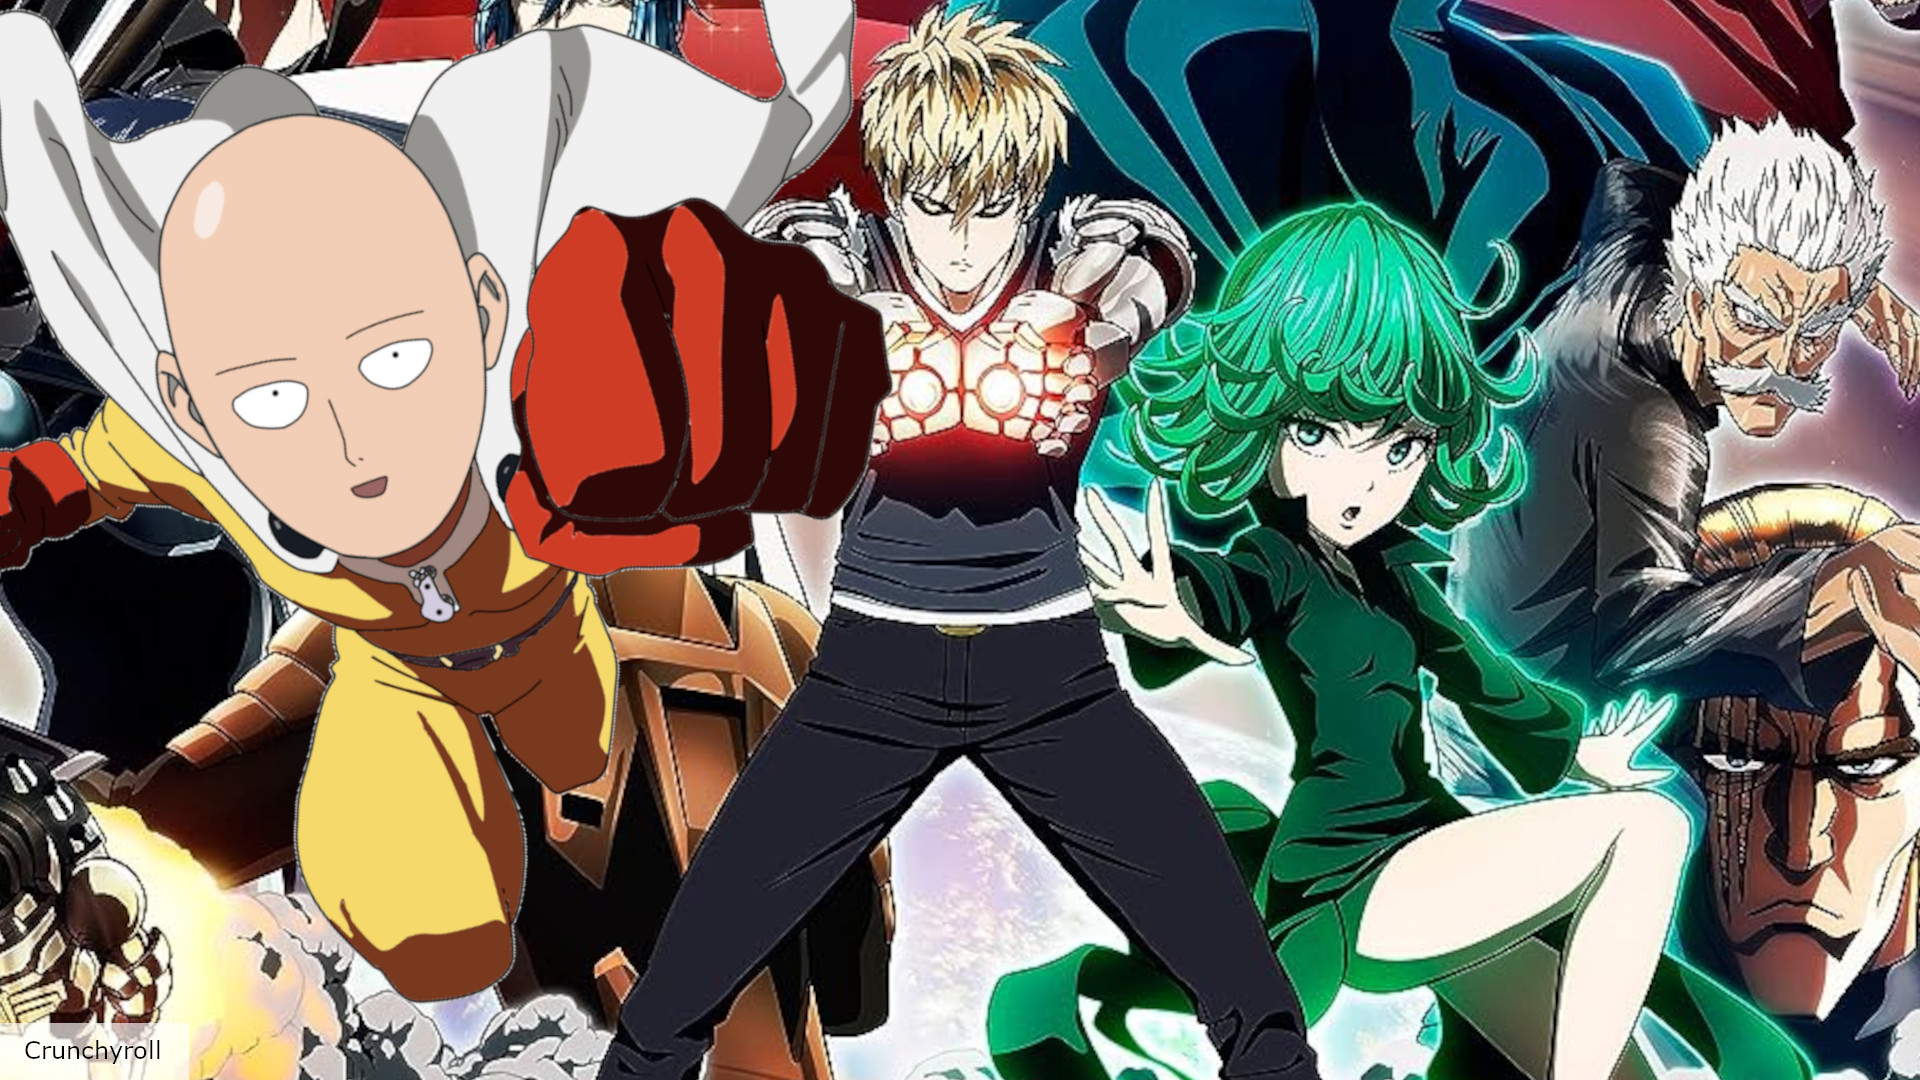 One-Punch Man Season 2 - 01 - Lost in Anime